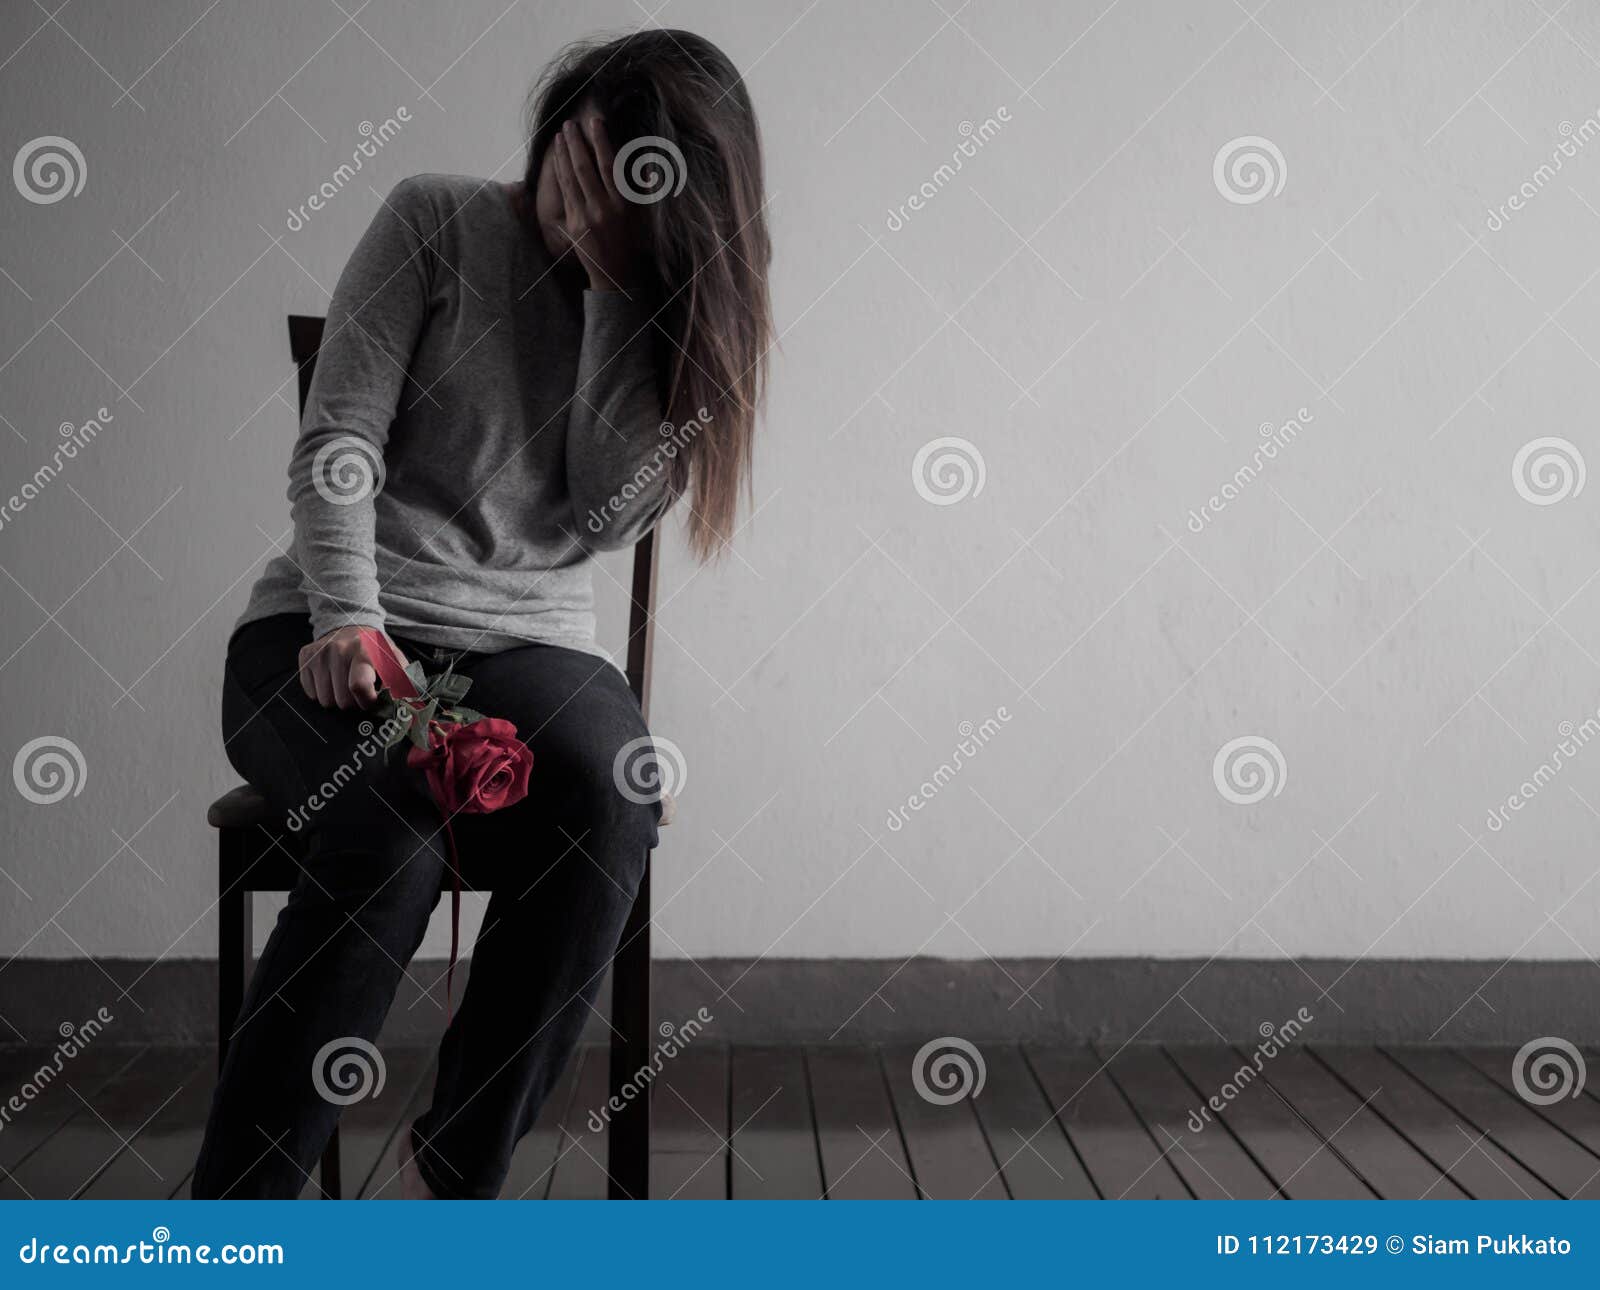 depressed broken hearted woman sitting and crying with red rose